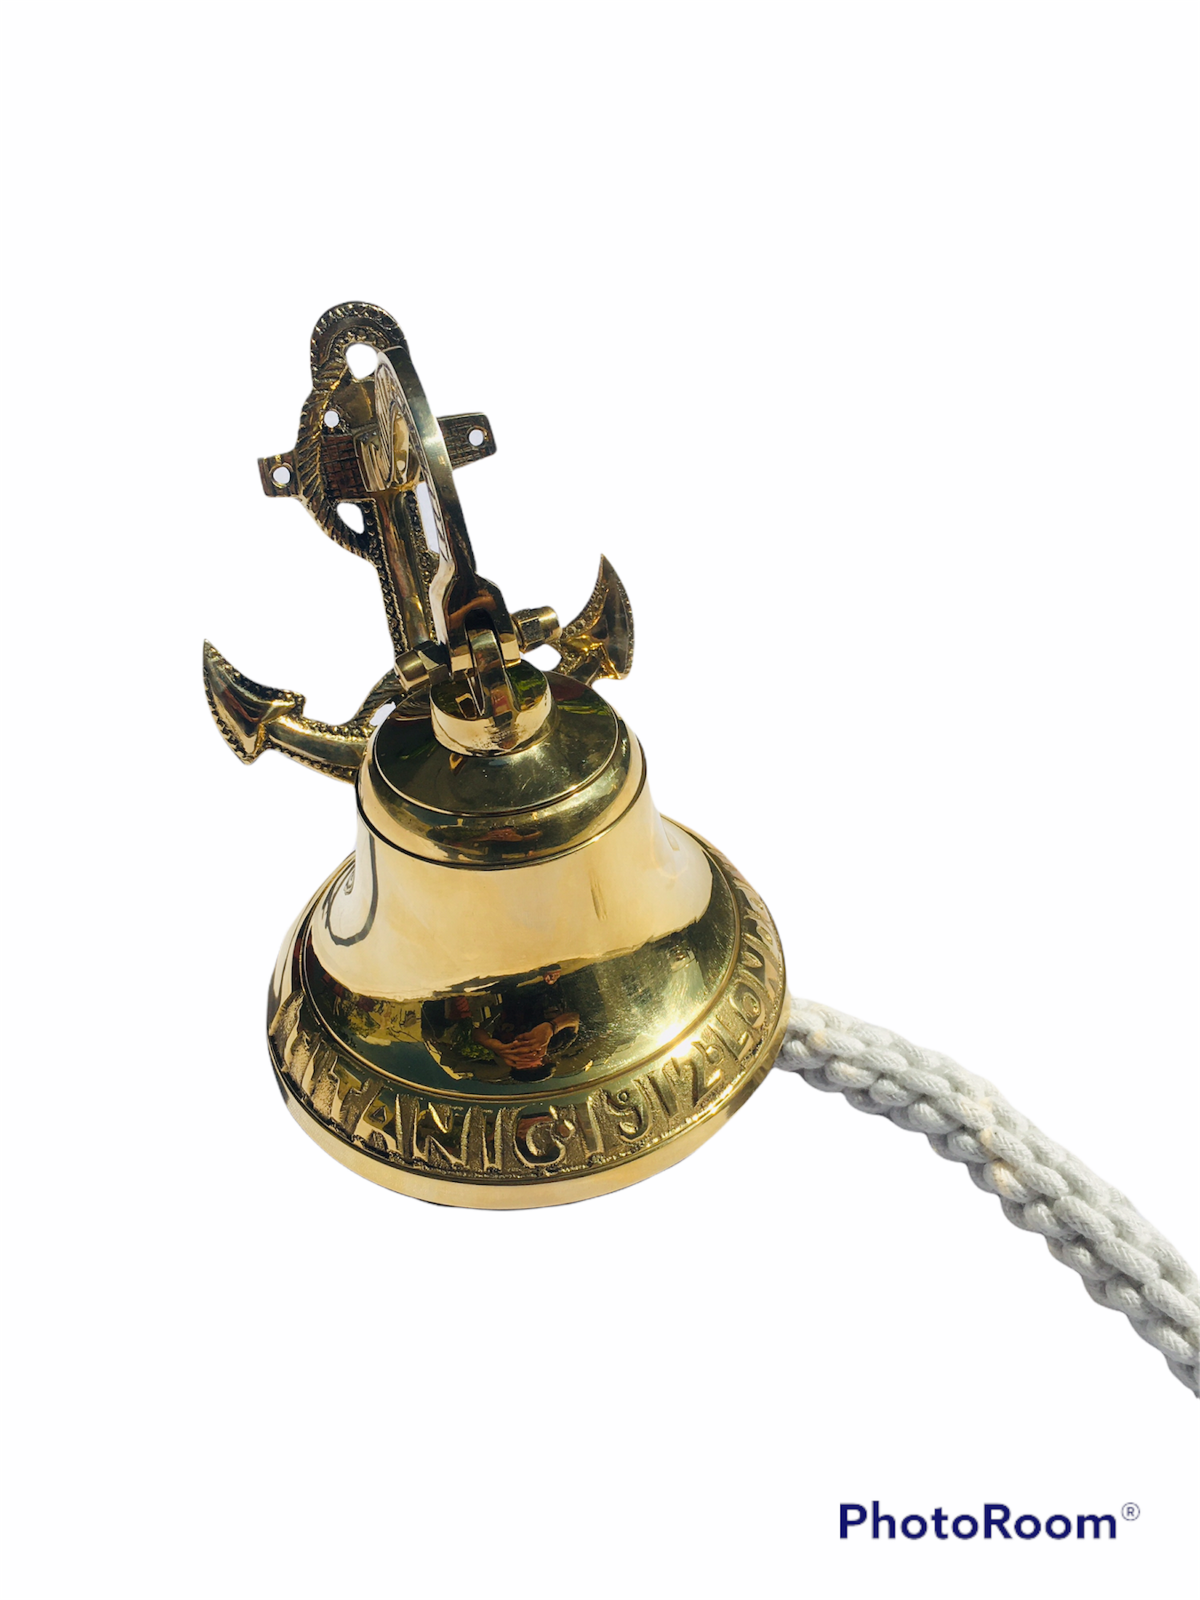 Vintage solid brass nautical table bell vintage desk decorative office/  hotel decor, table top calling bell.